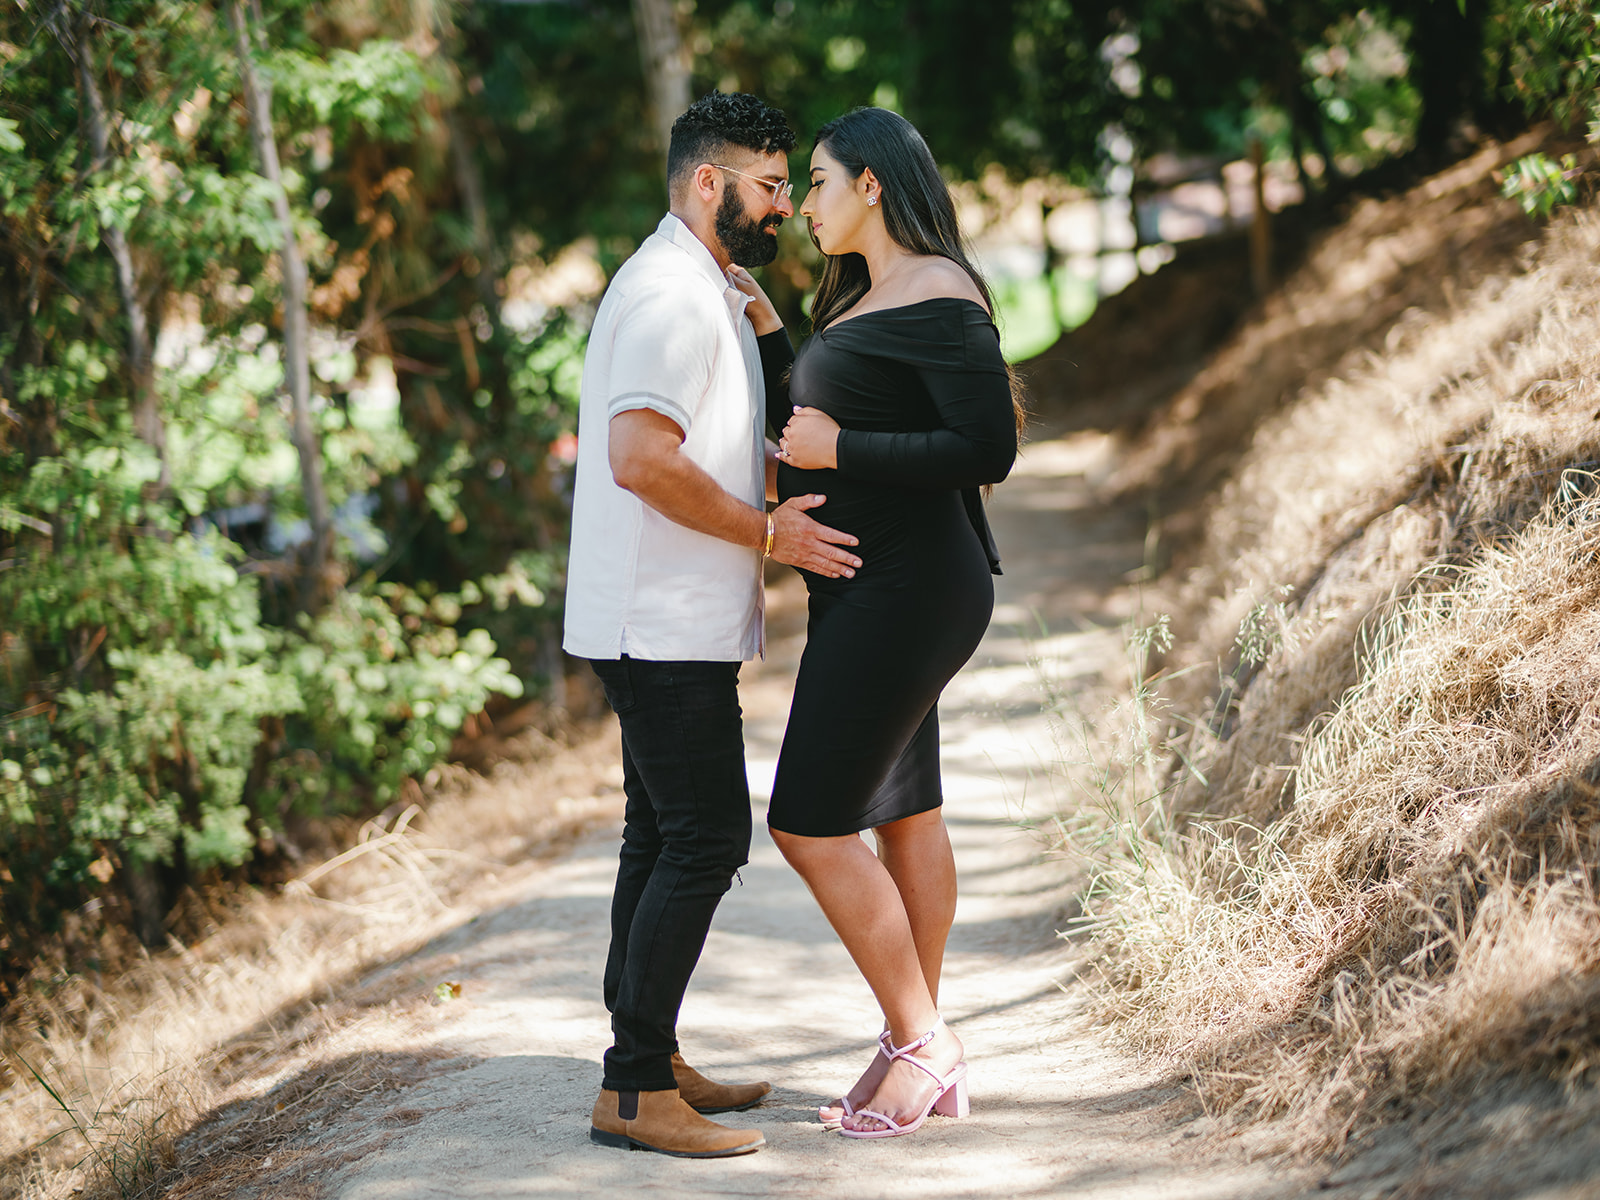 Maternity Session at Brand Libary in Glendale, California